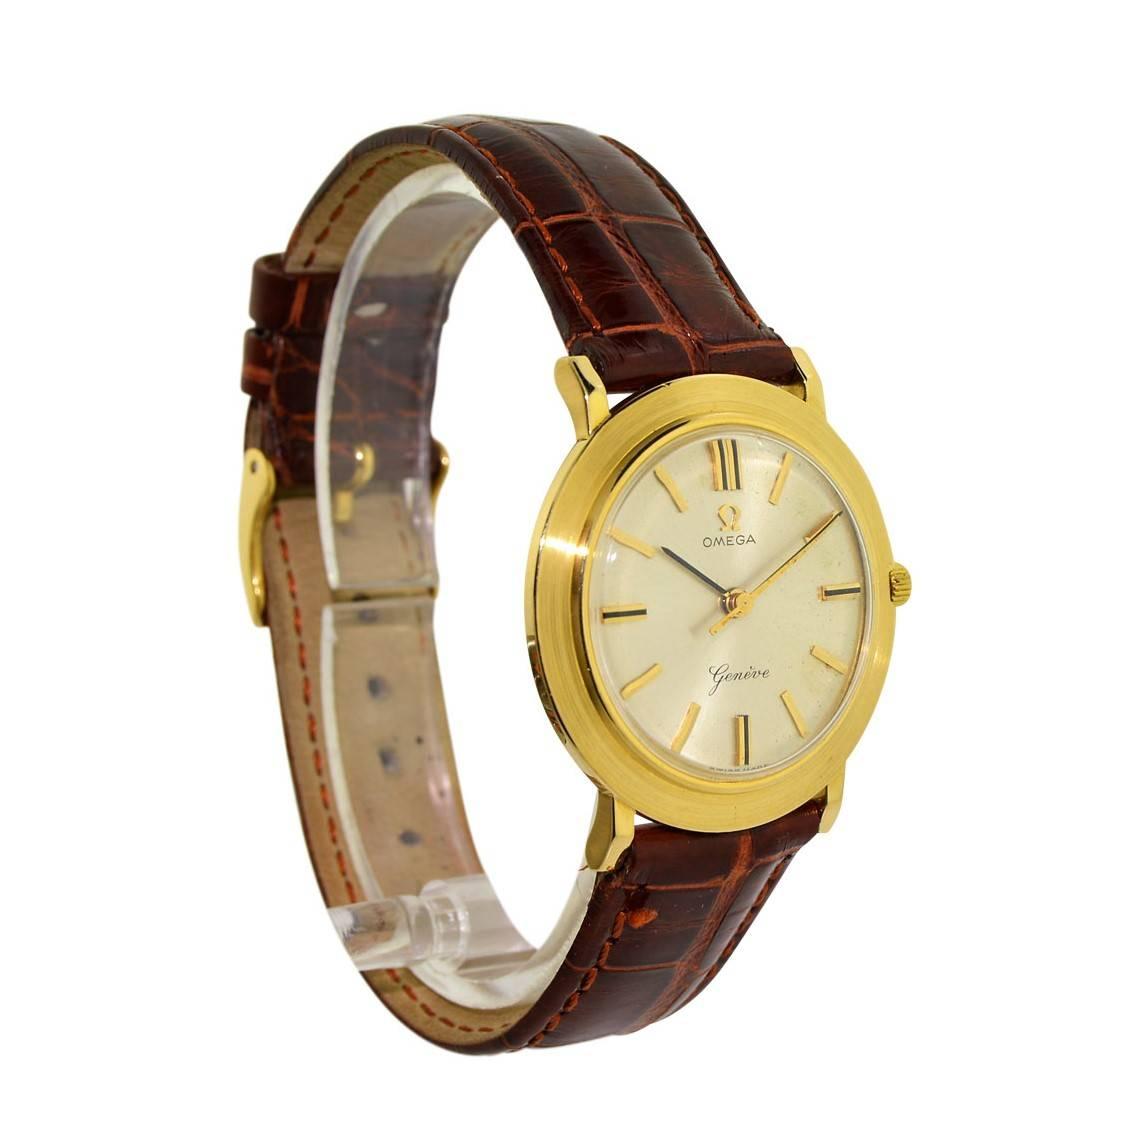 FACTORY / HOUSE: Omega Watch Company
STYLE / REFERENCE: Dress Style
METAL / MATERIAL: 14 Kt Solid Yellow Gold
DIMENSIONS: 37 mm X 34 mm
CIRCA: 1960
MOVEMENT / CALIBER: Manual Winding / 17 Jewels / cal. 600
DIAL / HANDS:  / Original with Baton